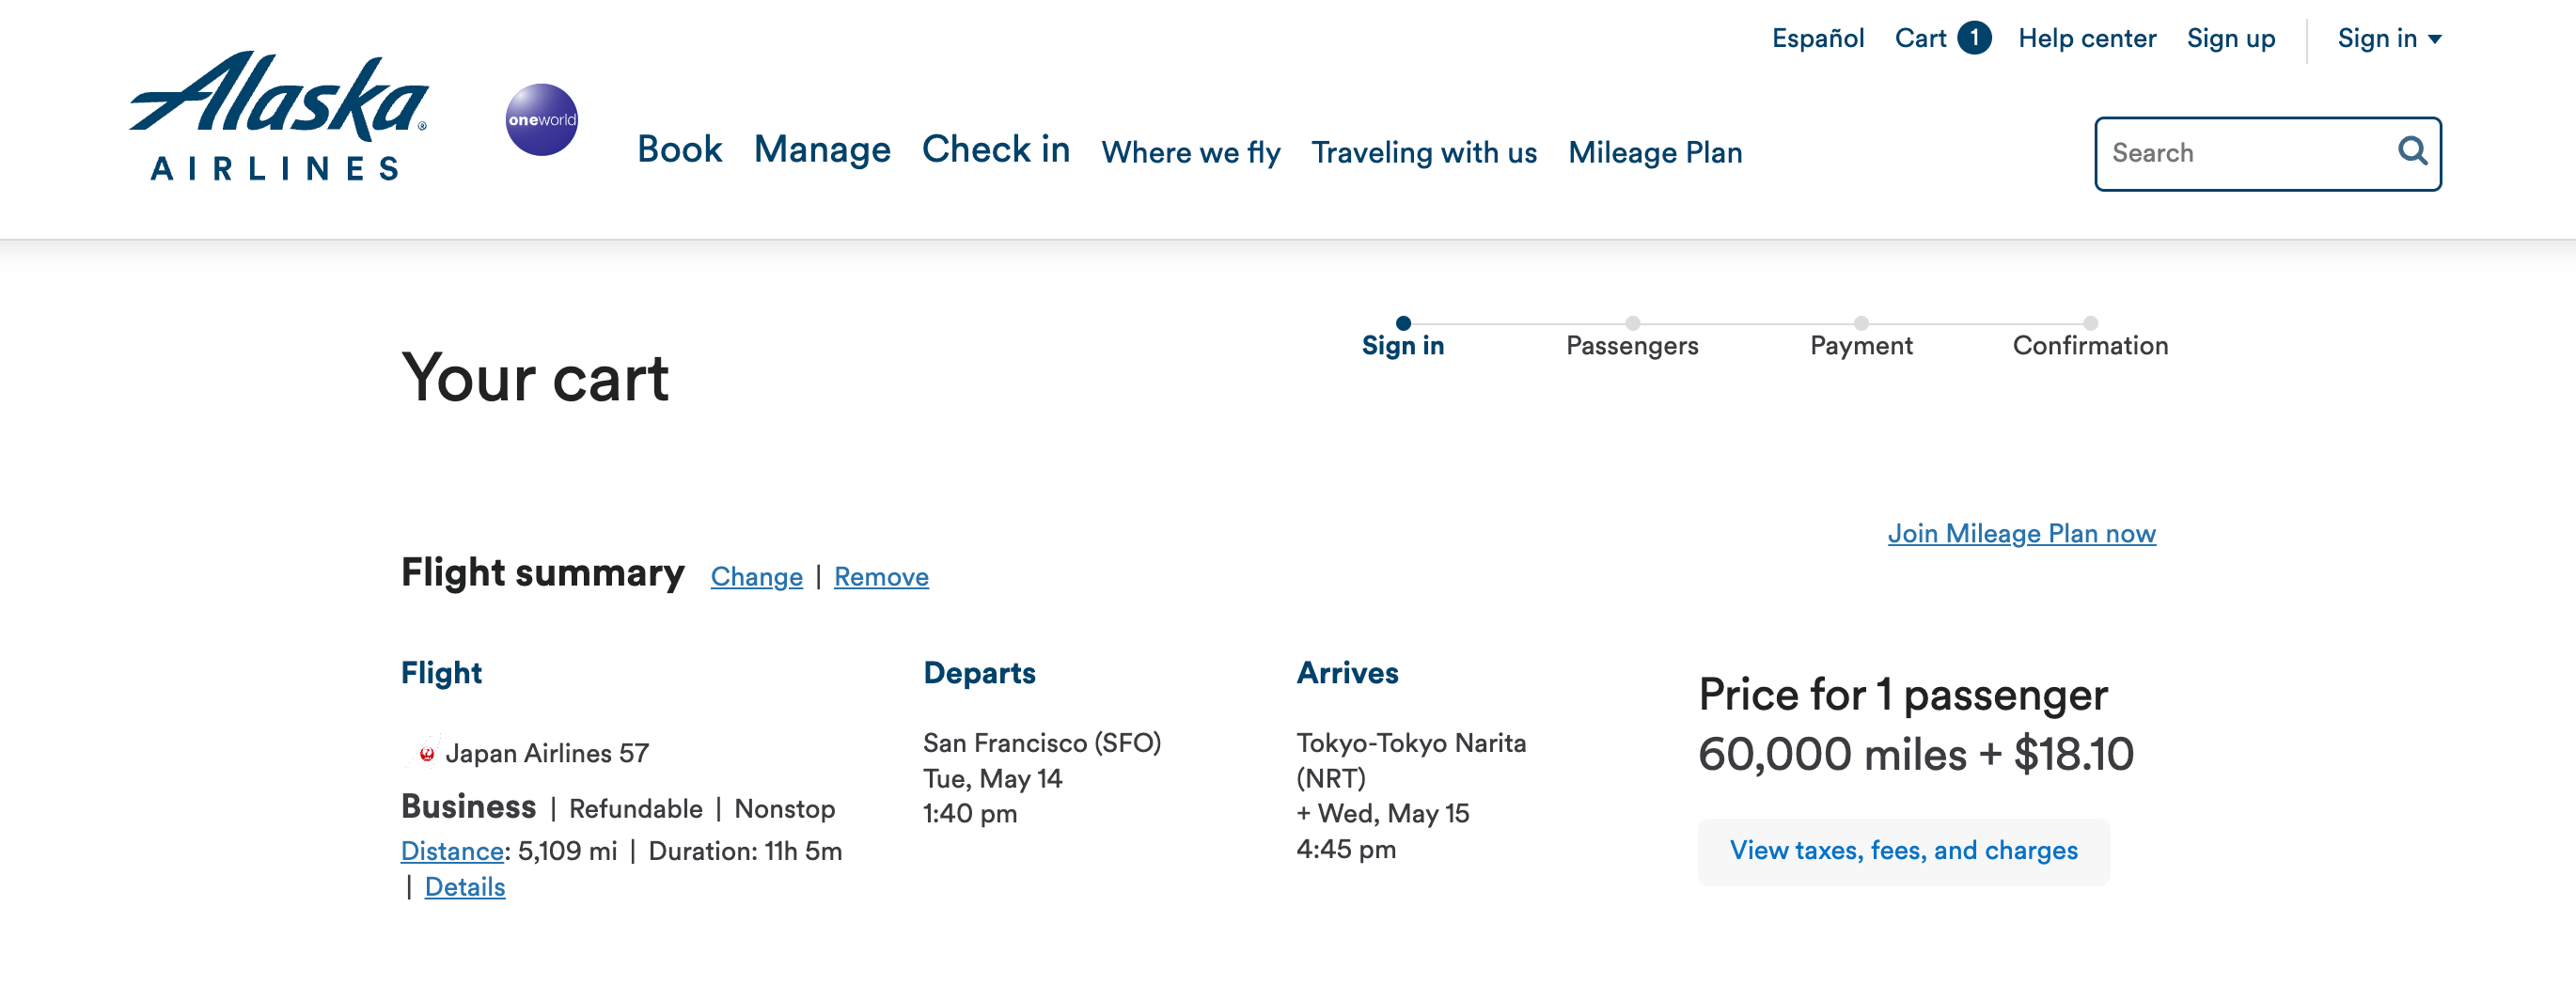 A one-way, business-class flight on Japan Airlines booked through Alaska Airlines Mileage Plan